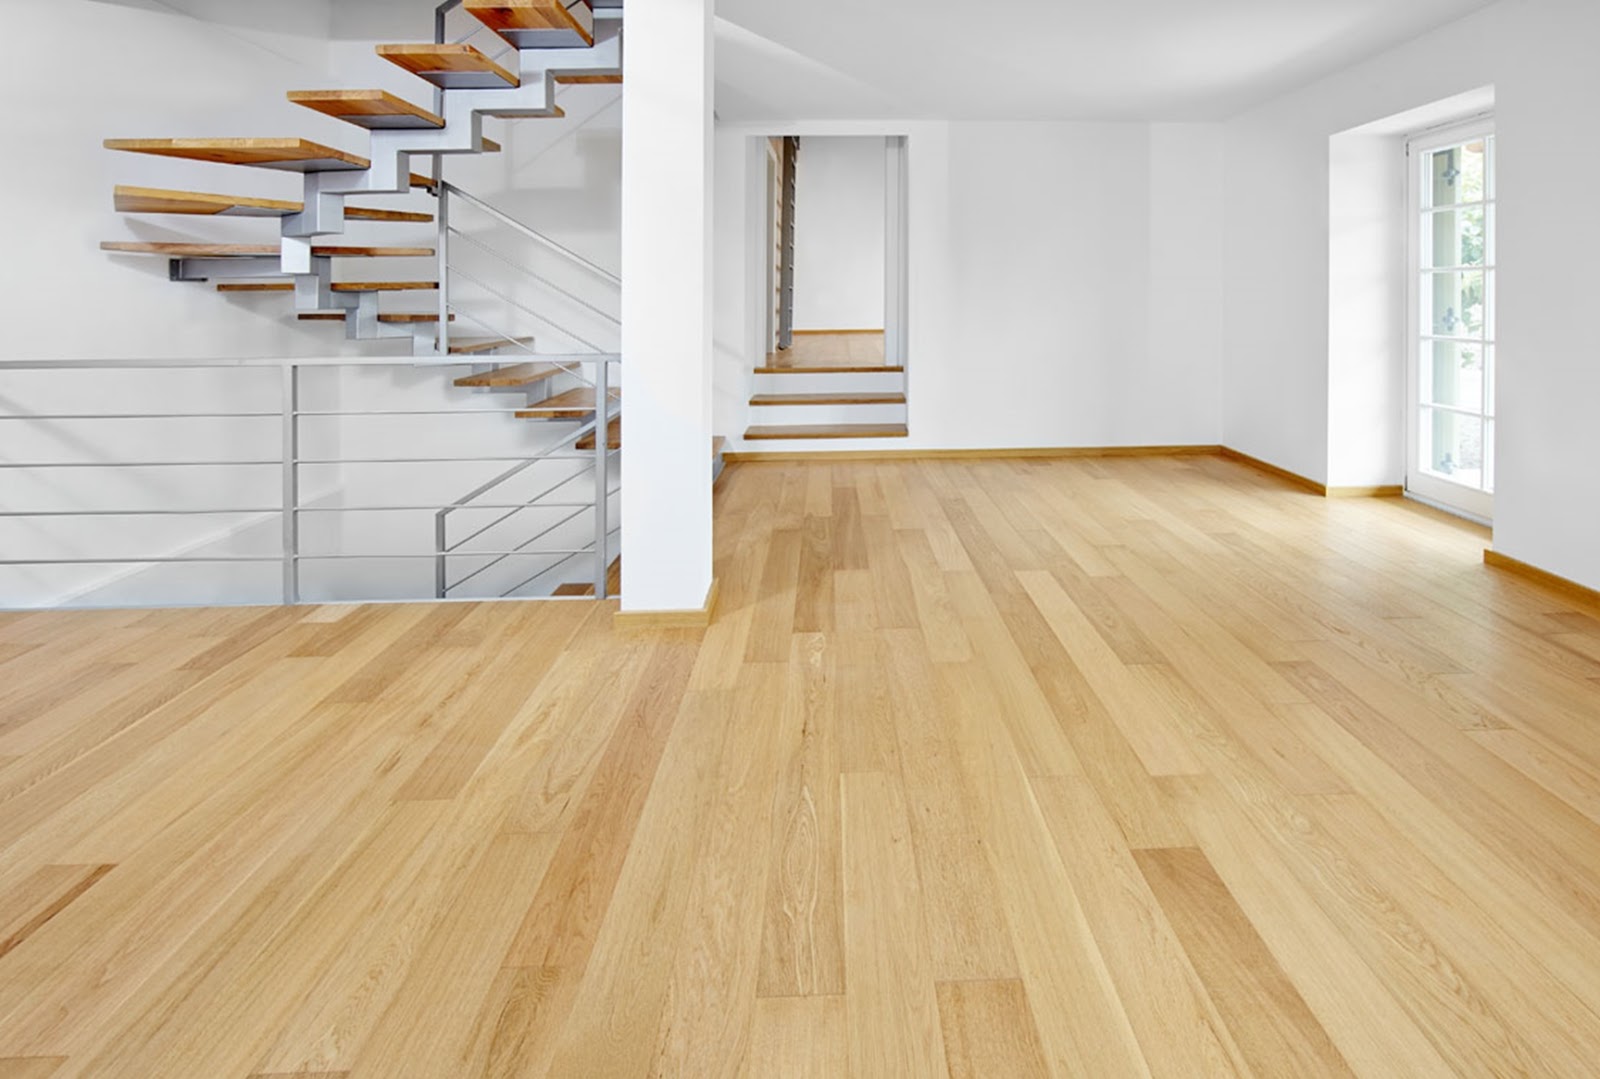 Transform Your Space with Timber Flooring